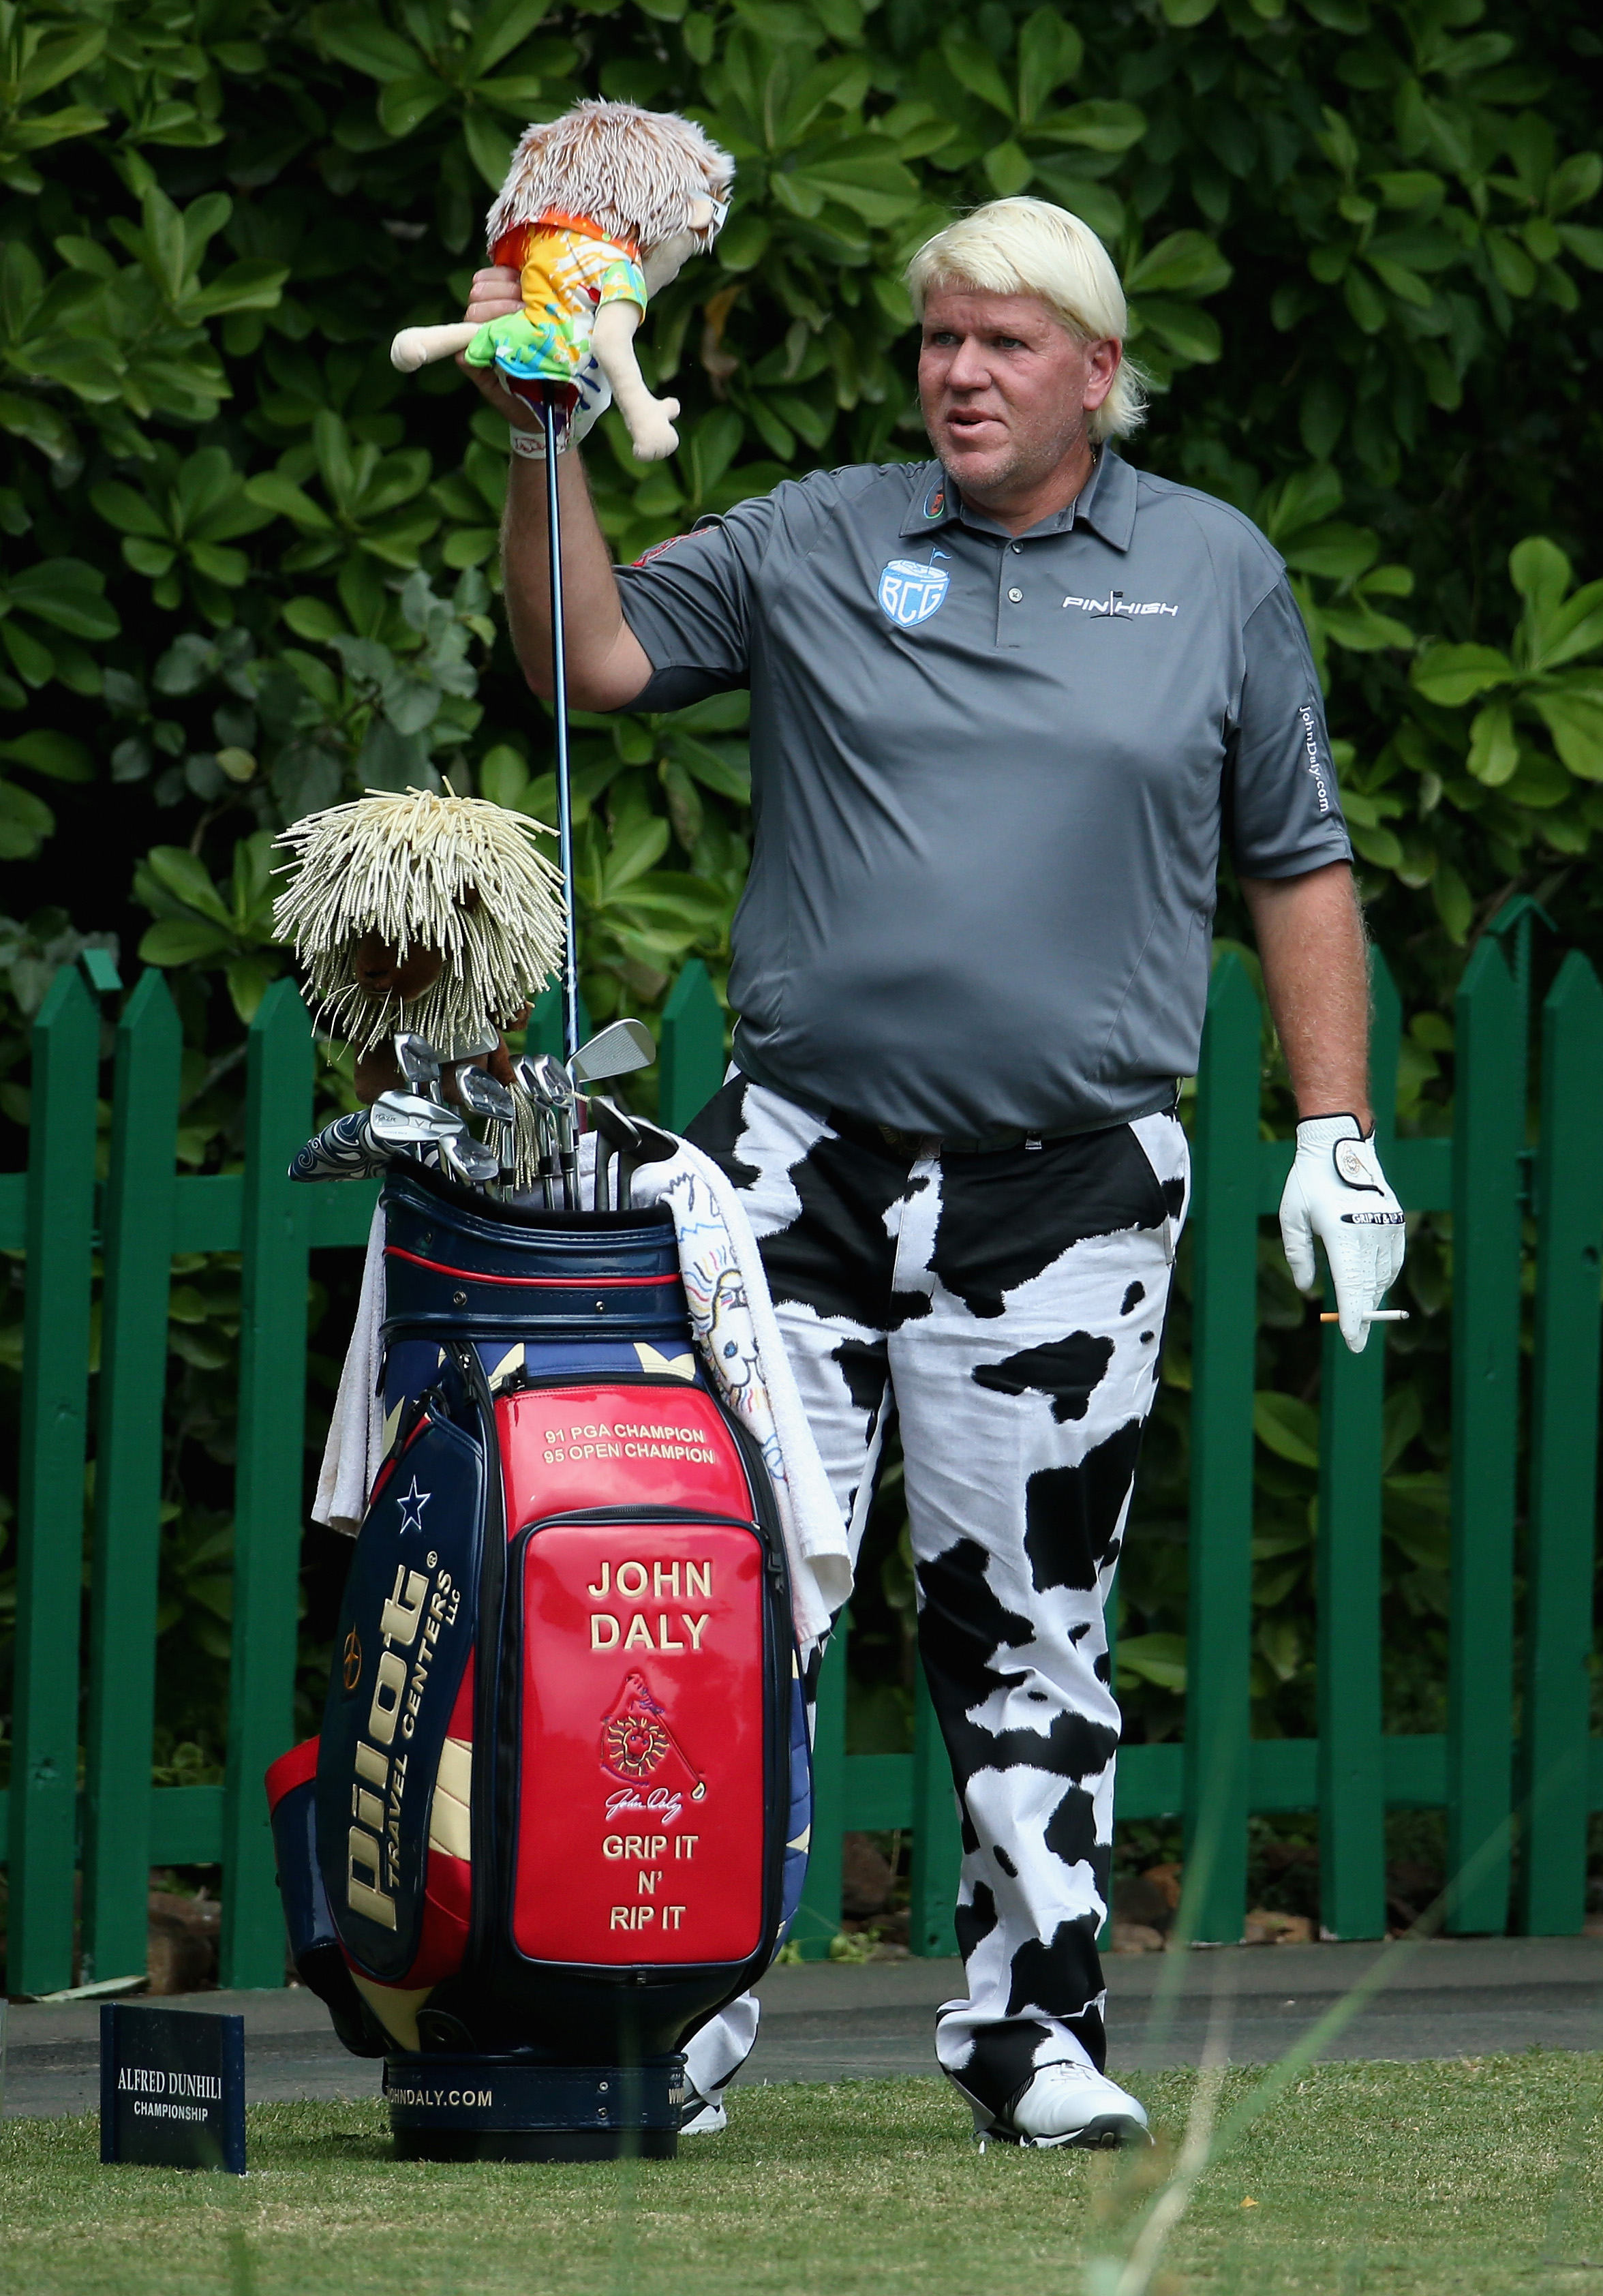 MALELANE, SOUTH AFRICA - NOVEMBER 26: in John Daly of the USA action during the pro-am ahead of the Alfred Dunhill Championship at Leopard Creek Country Club on November 26, 2013 in Malelane, South Africa. (Photo by Warren Little/Getty Images) ORG XMIT: 452343851 ORIG FILE ID: 452076107